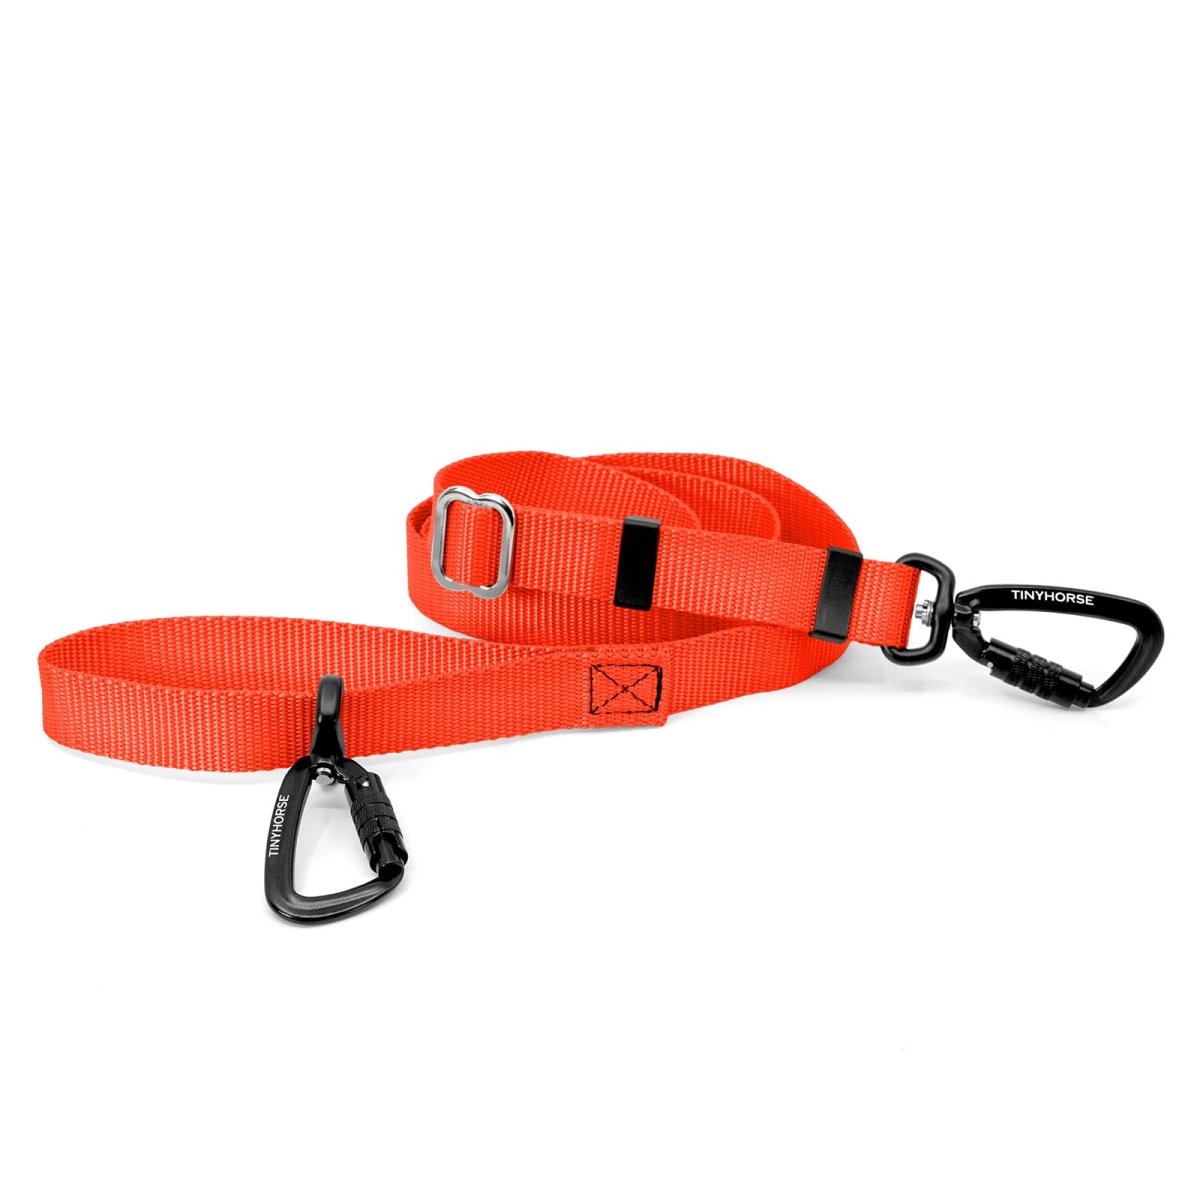 A neon orange-coloured Lead-All Lite Extra with an adjustable nylon webbing leash and 2 auto-locking carabiners